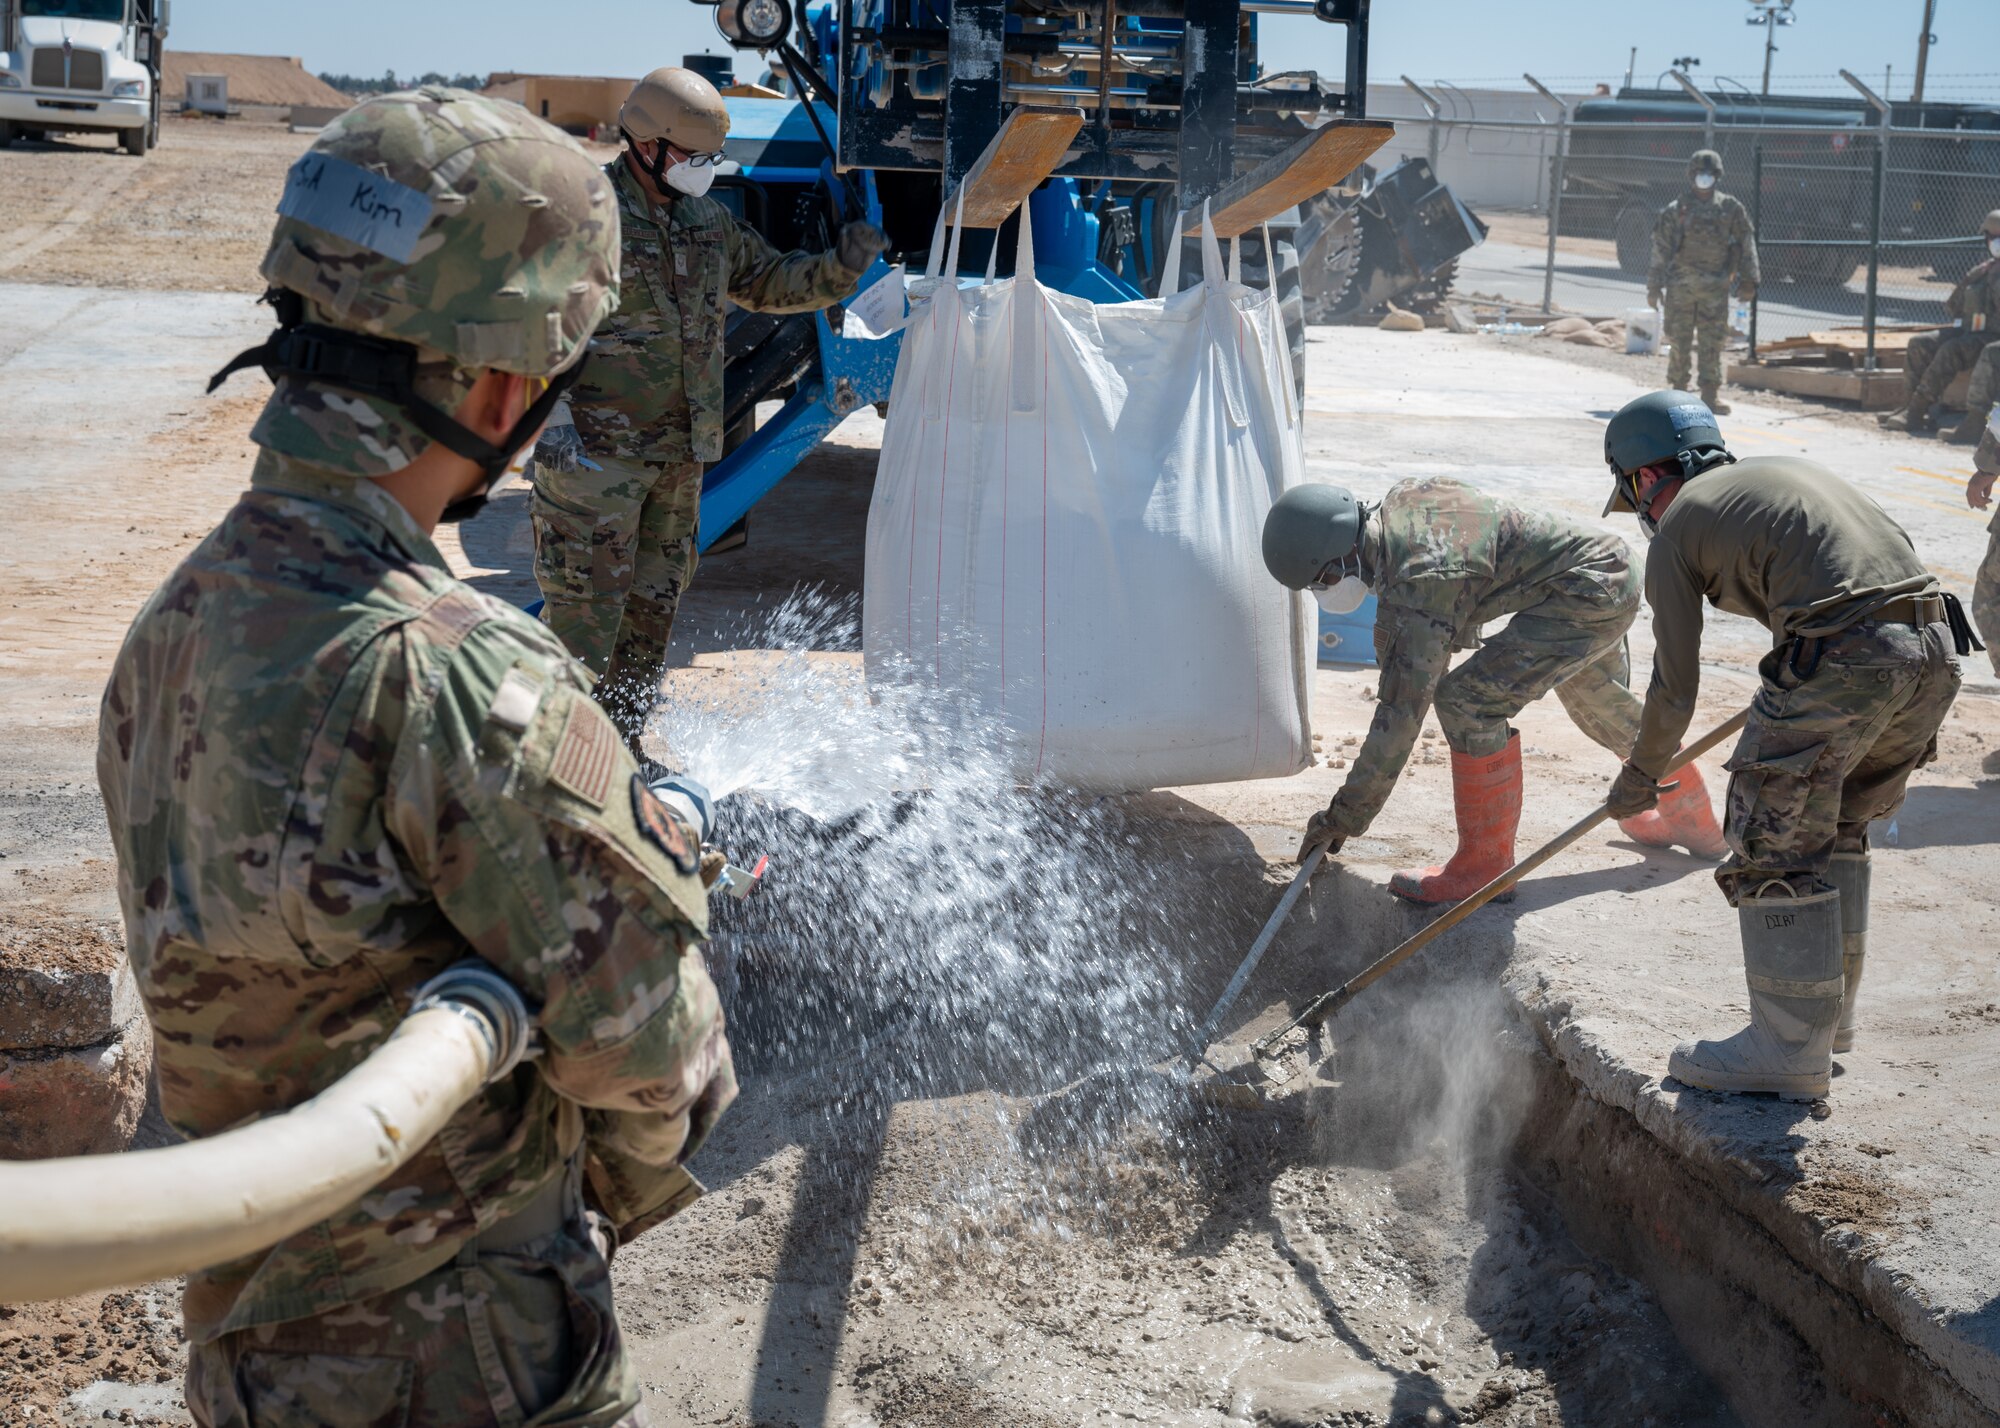 OAS IV is a twice-annual exercise hosted by Ninth Air Force (Air Forces Central) to enhance Agile Combat Employment capabilities and strengthen regional partnerships.  Members from multiple squadrons helped set up a temporary camp where Airmen were stationed while executing real world missions.